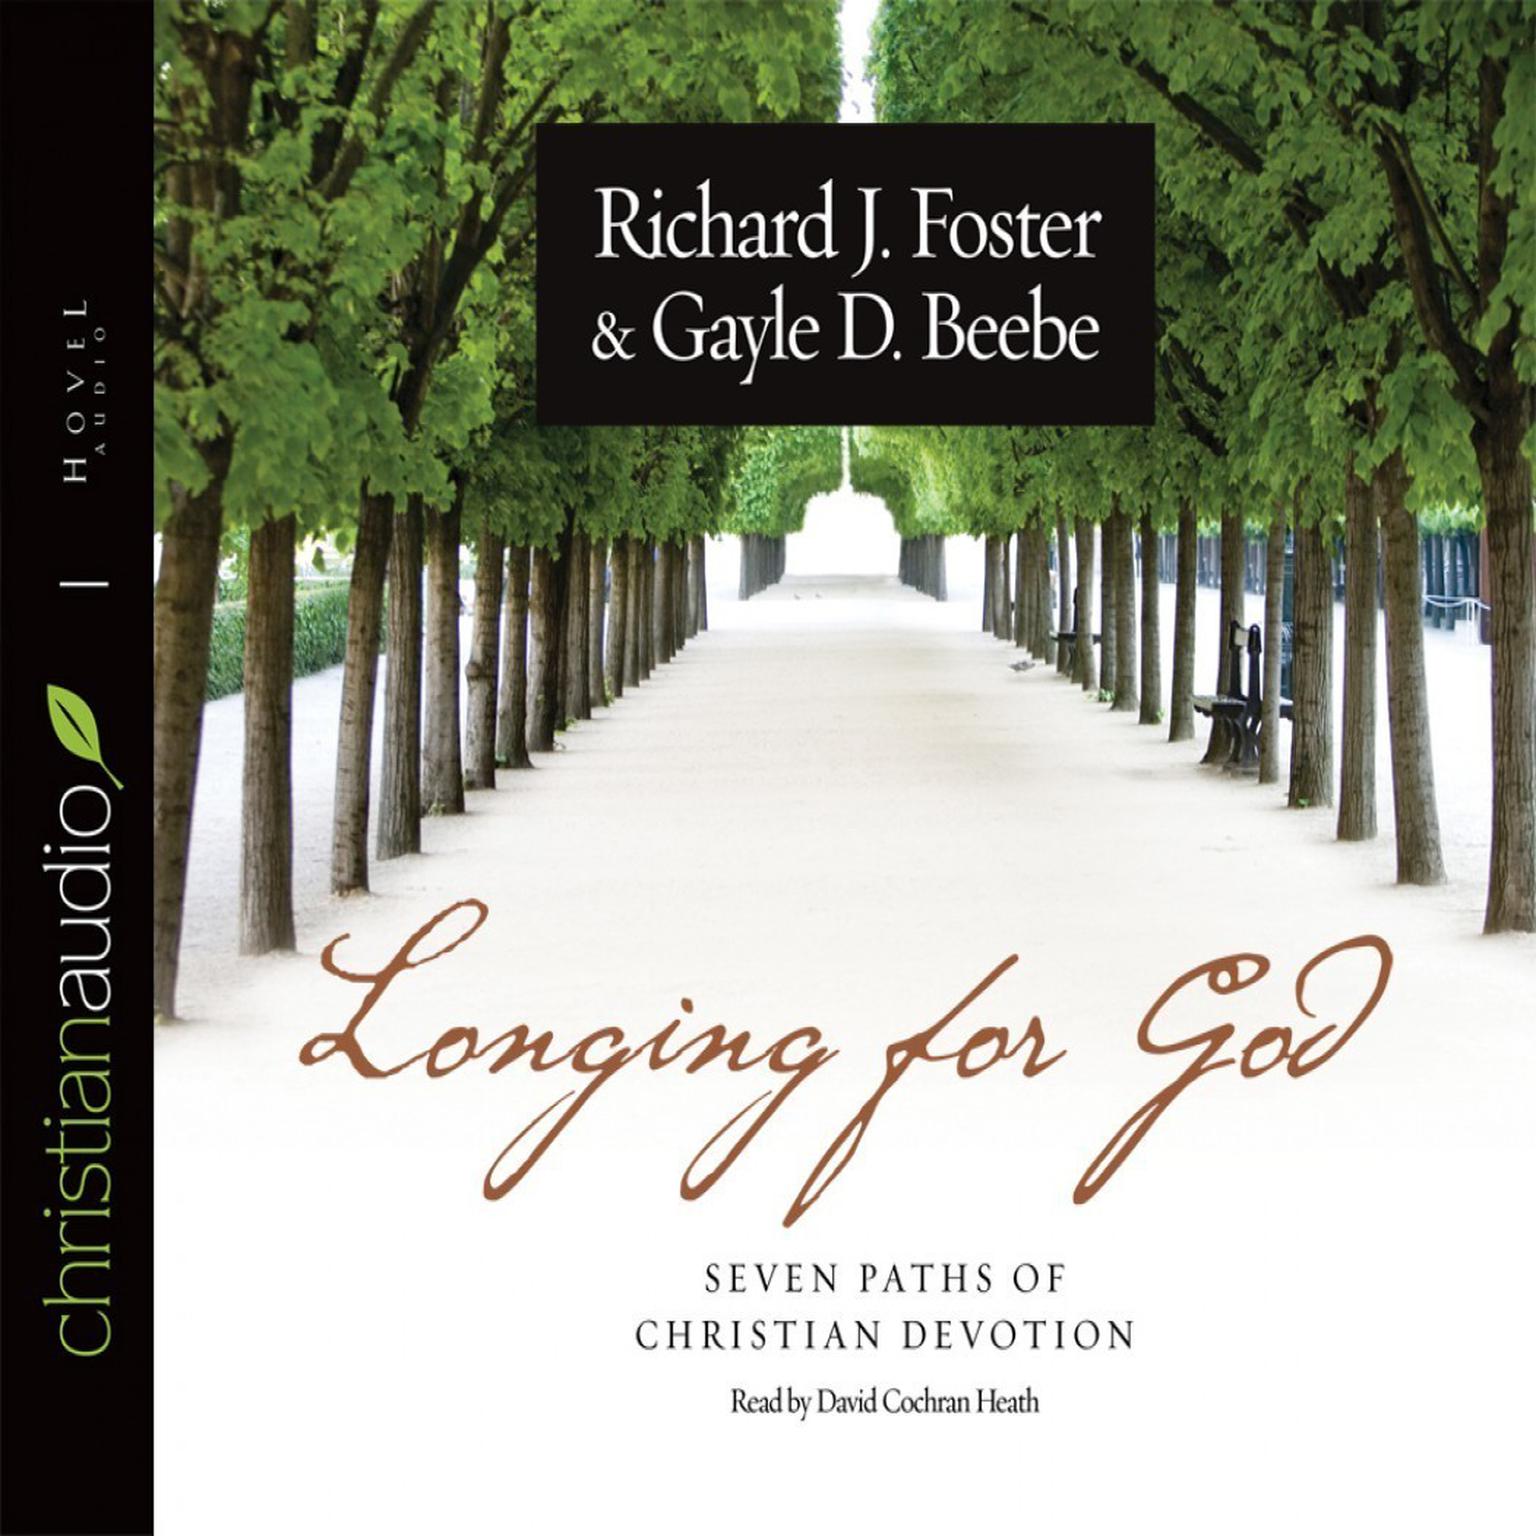 Longing for God (Abridged): Seven Paths of Christian Devotion Audiobook, by Richard J. Foster